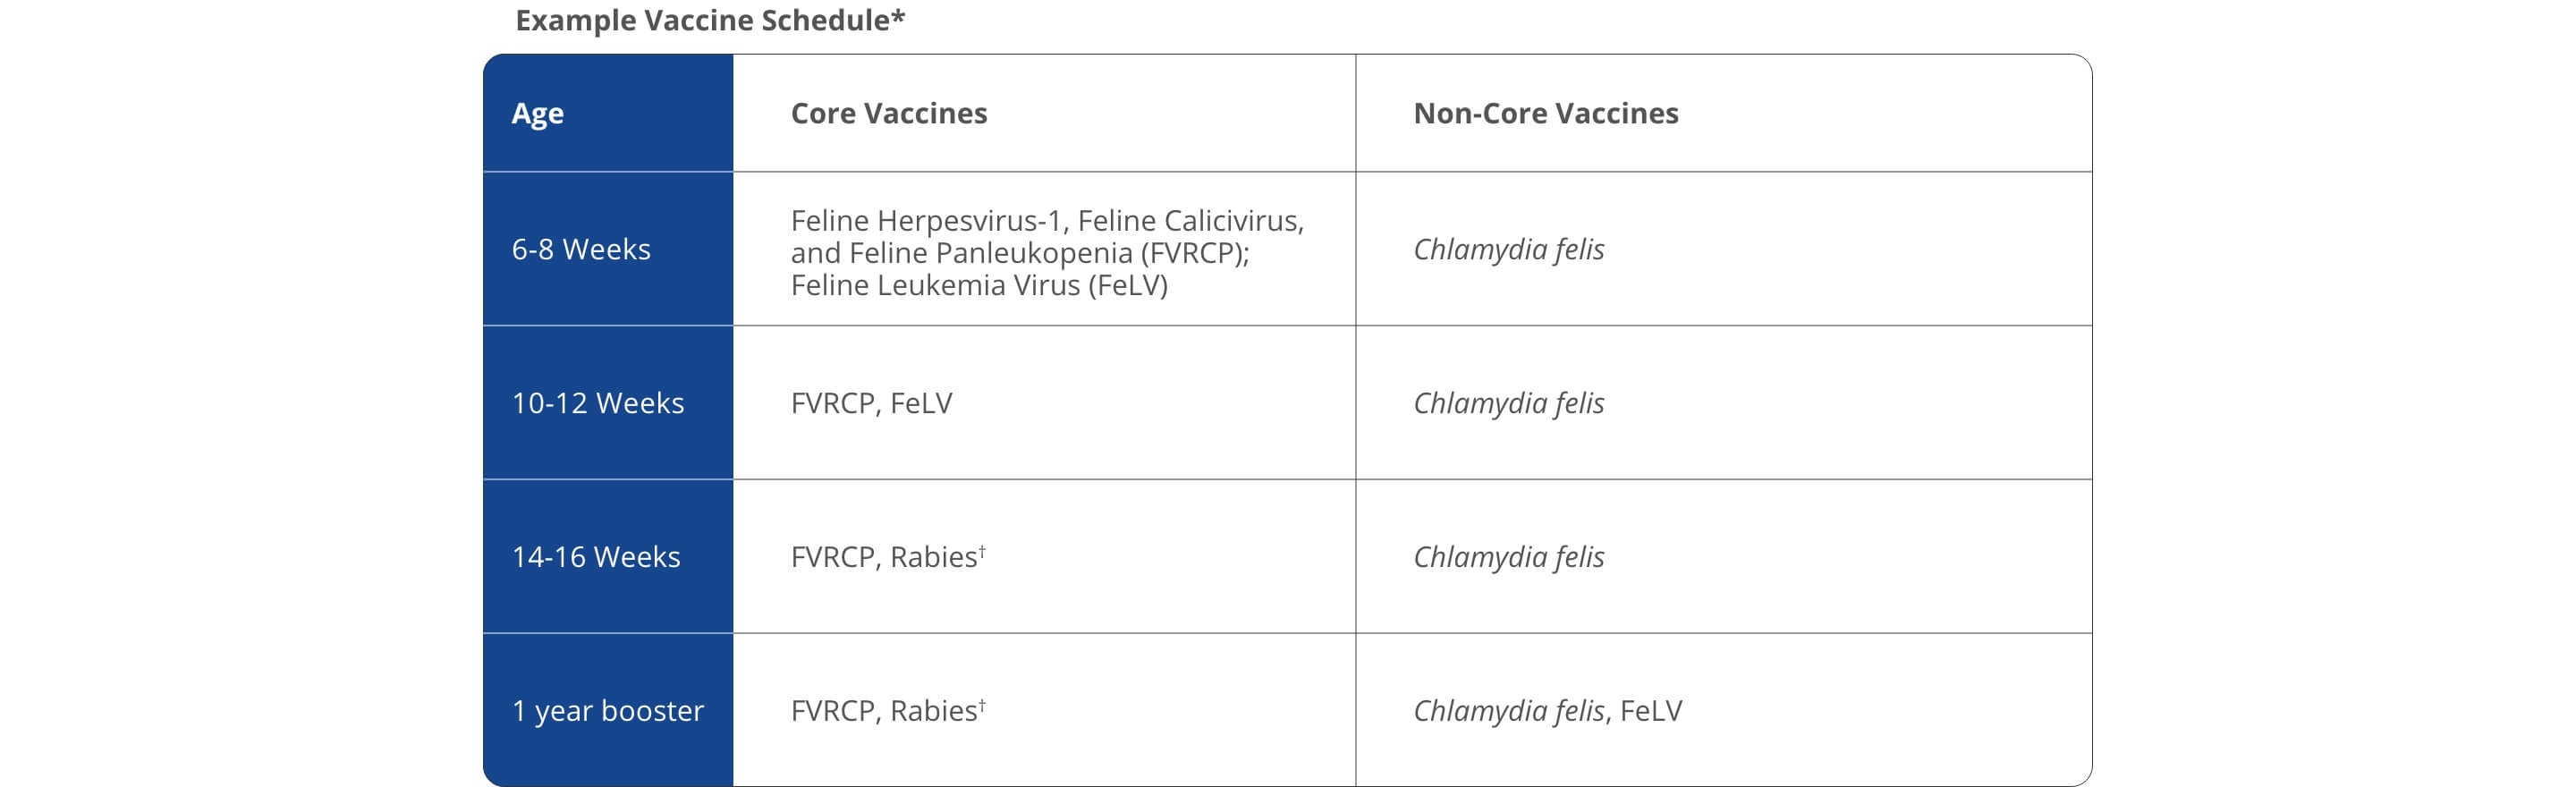 A chart showing an example of a vaccination schedule for cats. The chart shows that at 6-8 weeks of age, kittens require Feline Herpesvirus-1, Feline Calicivirus, and Feline Panleukopenia (FVRCP);Feline Leukemia Virus (FeLV), and Chlamydia felis. At 10-12 Weeks, they need FVRCP, FeLV, and Chlamydia felis. At 14-16 Weeks, they need FVRCP, Rabies†, and Chlamydia felis. At one year, they need FVRCP, Rabies†, Chlamydia felis, and FeLV | Healthy Habits For New Pets